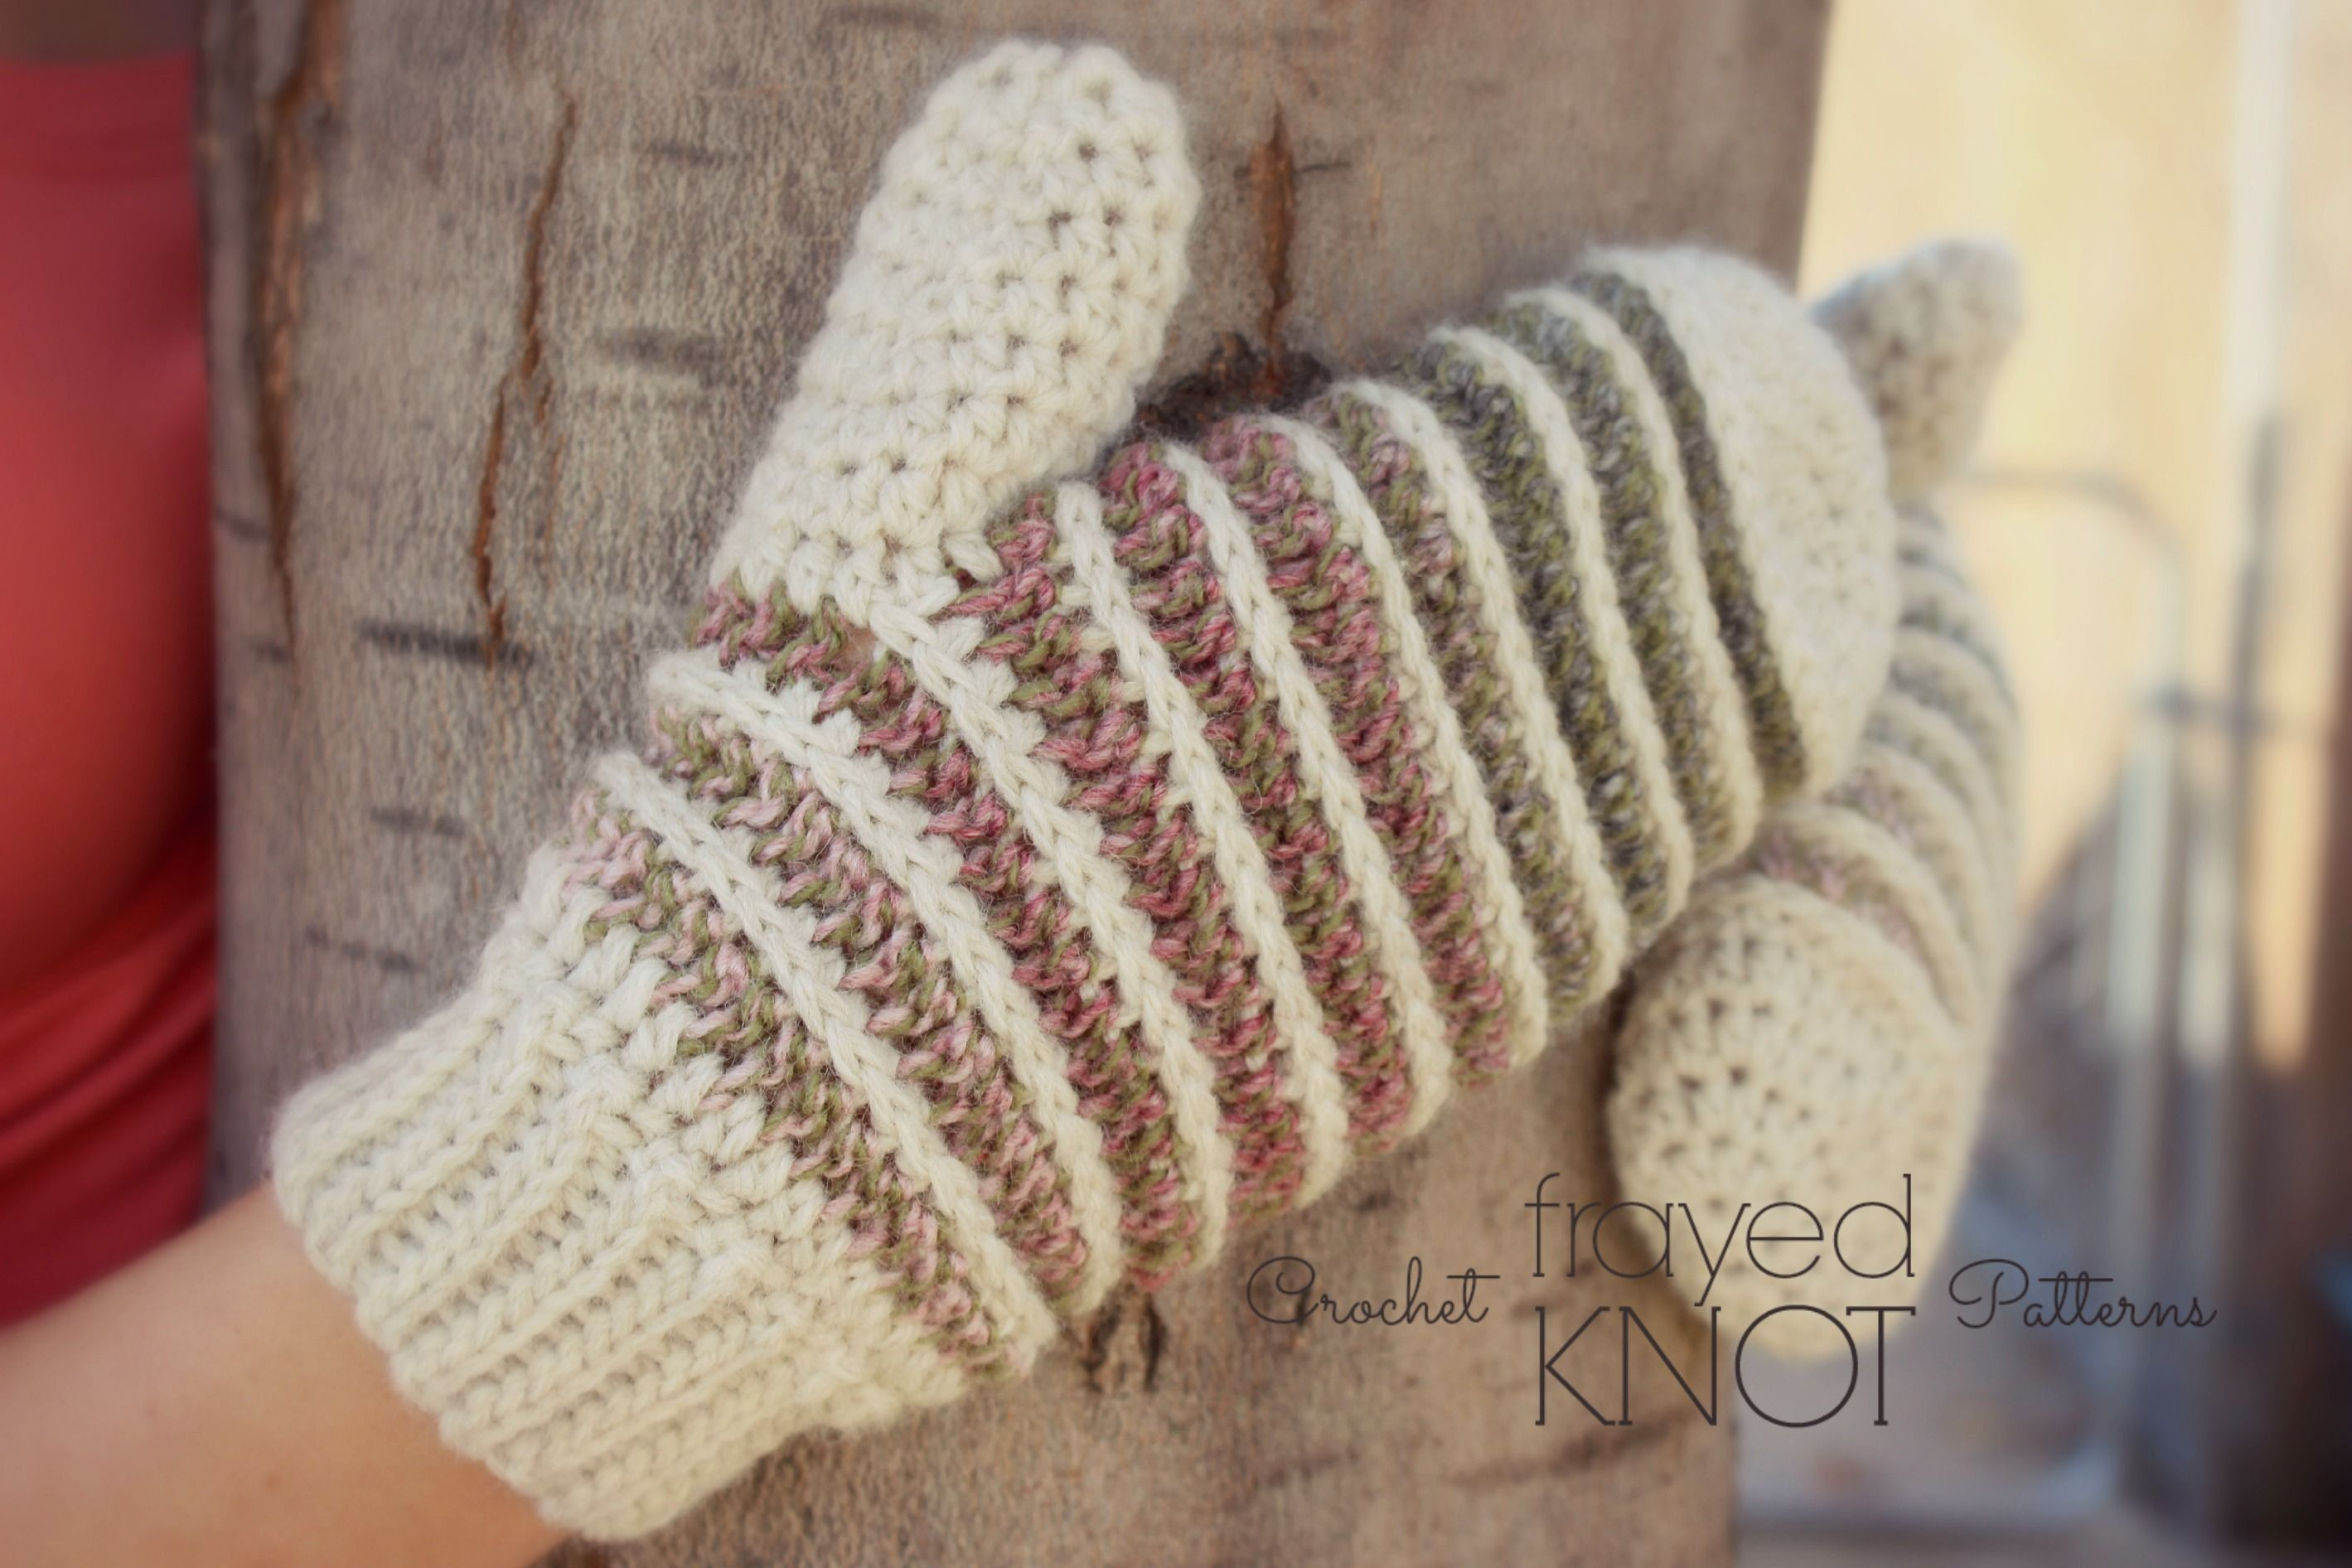 Crochet Mittens Free Pattern Its Finally My Turn To Share My Free Mitten Pattern For The Crochet